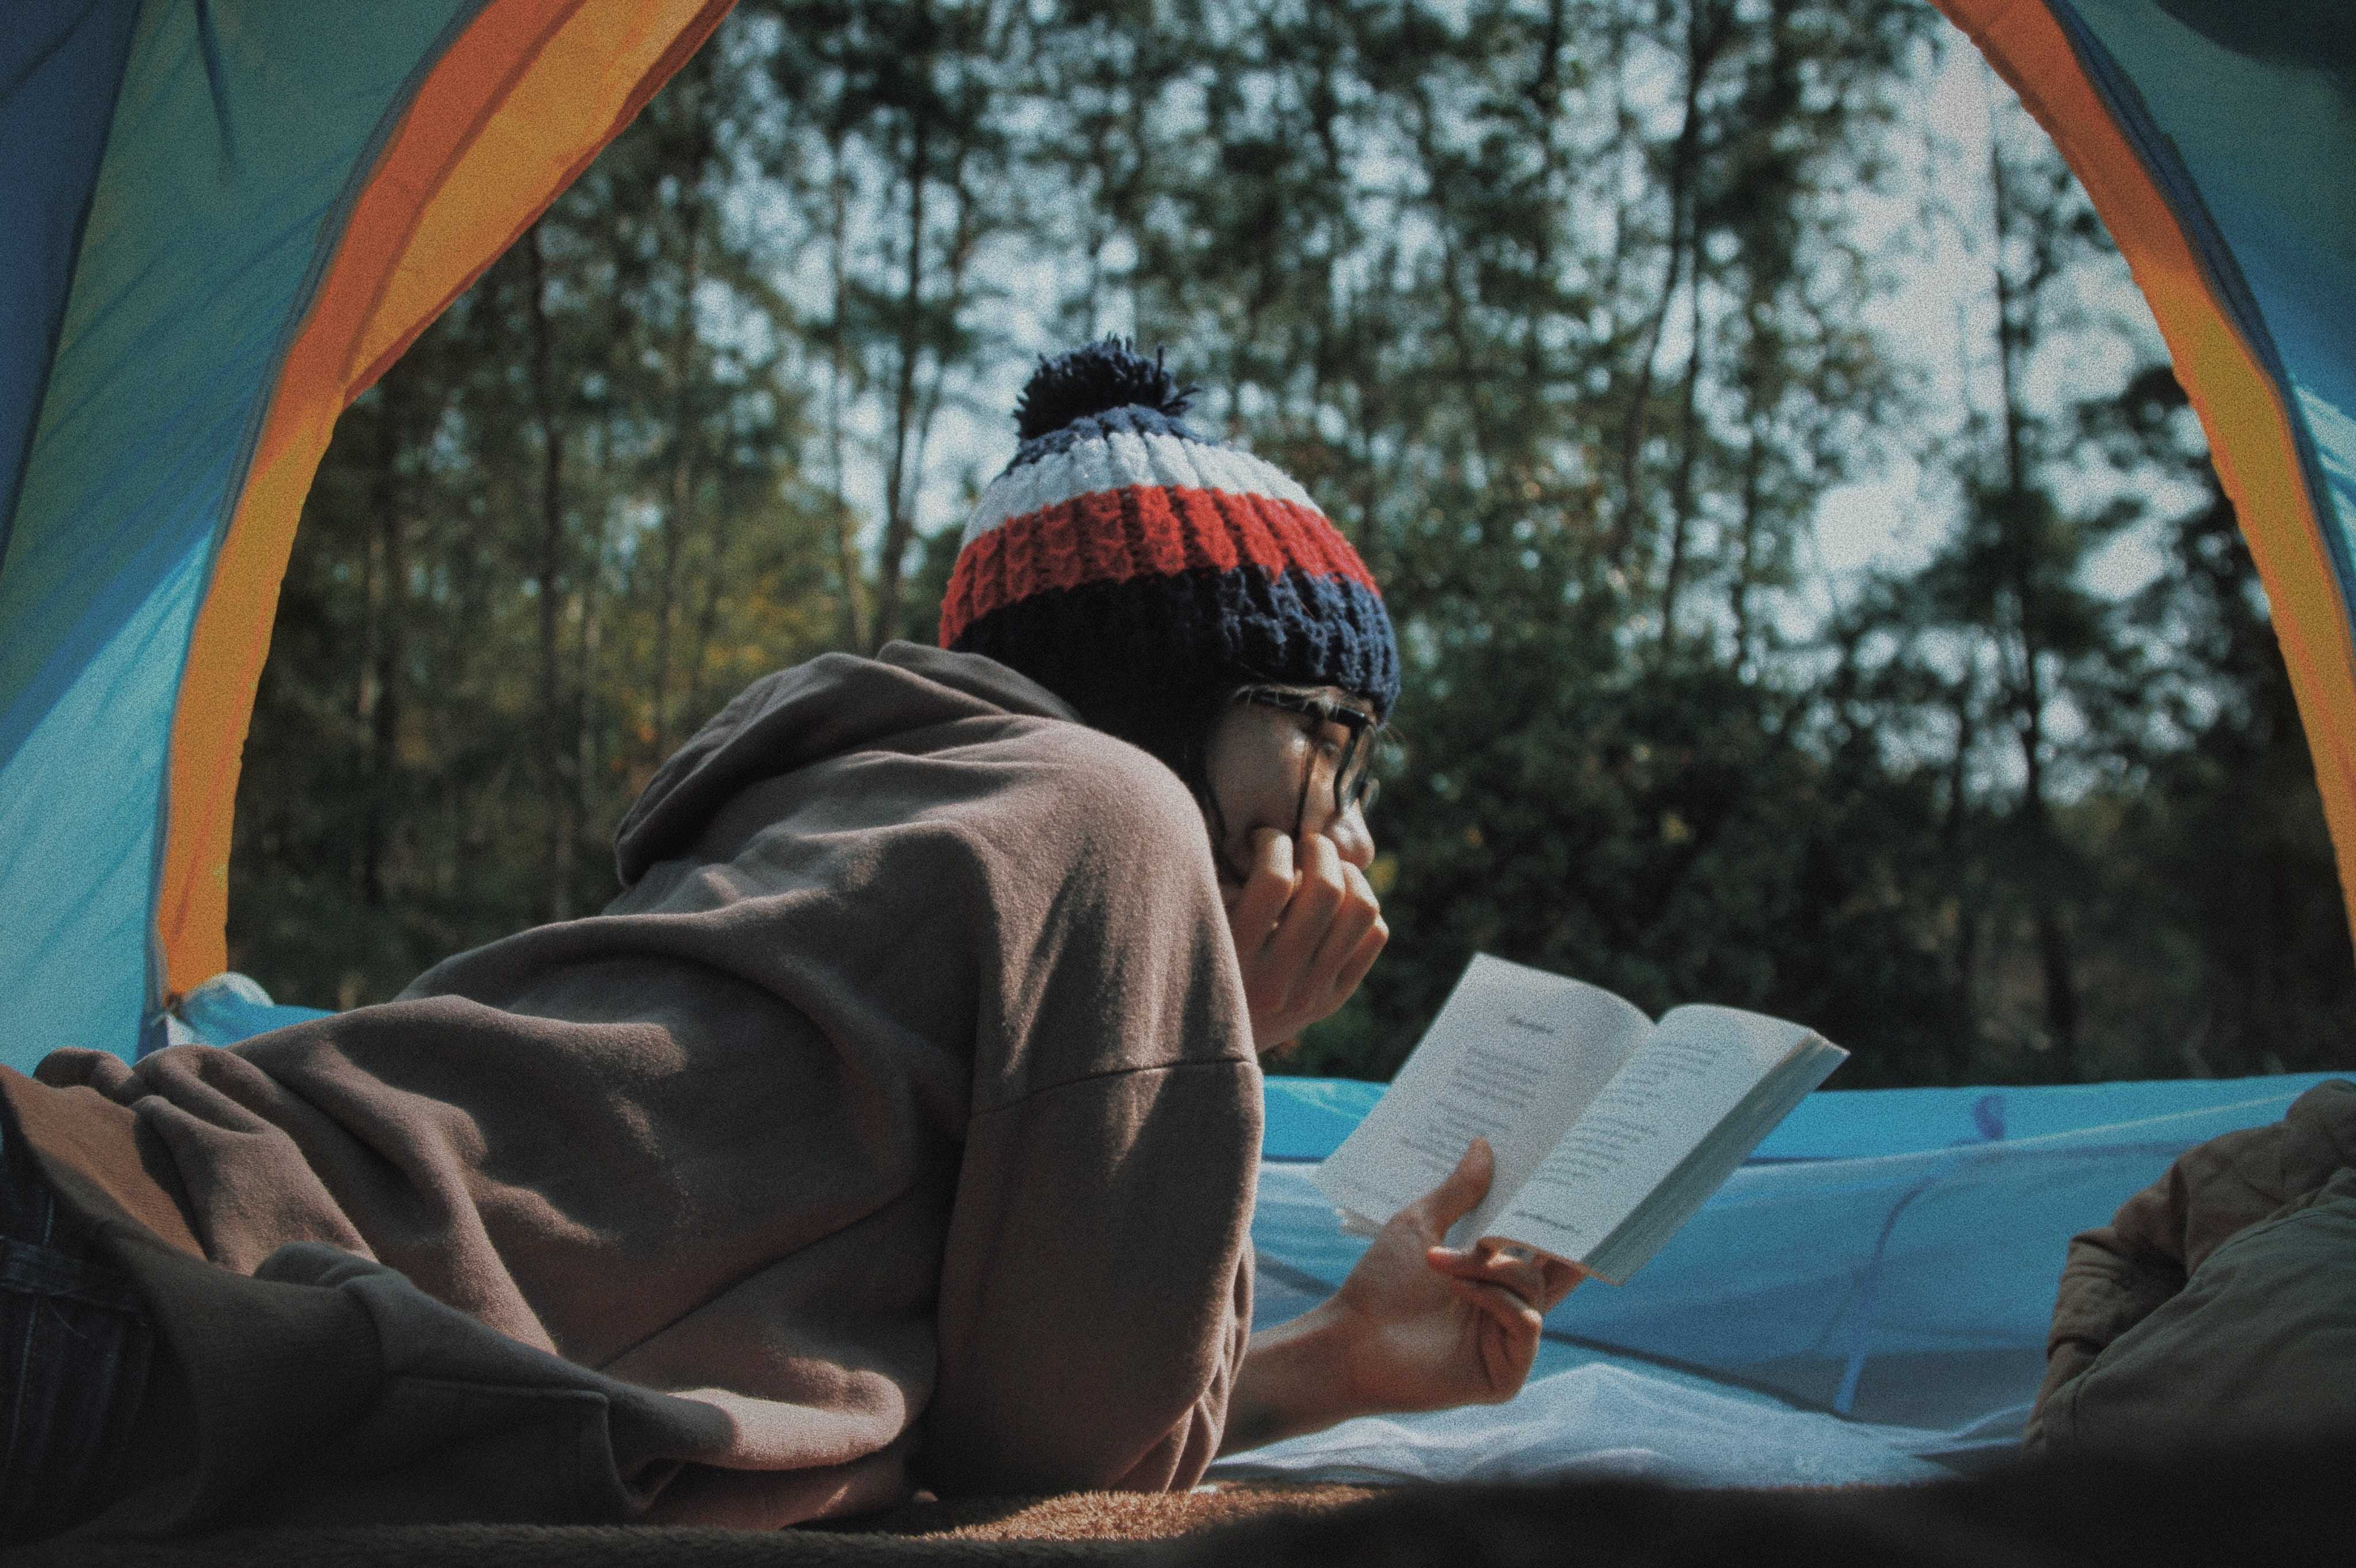 Bring along books and games for those quiet moments on your camping trip (photo: Lê Tän/Unsplash)